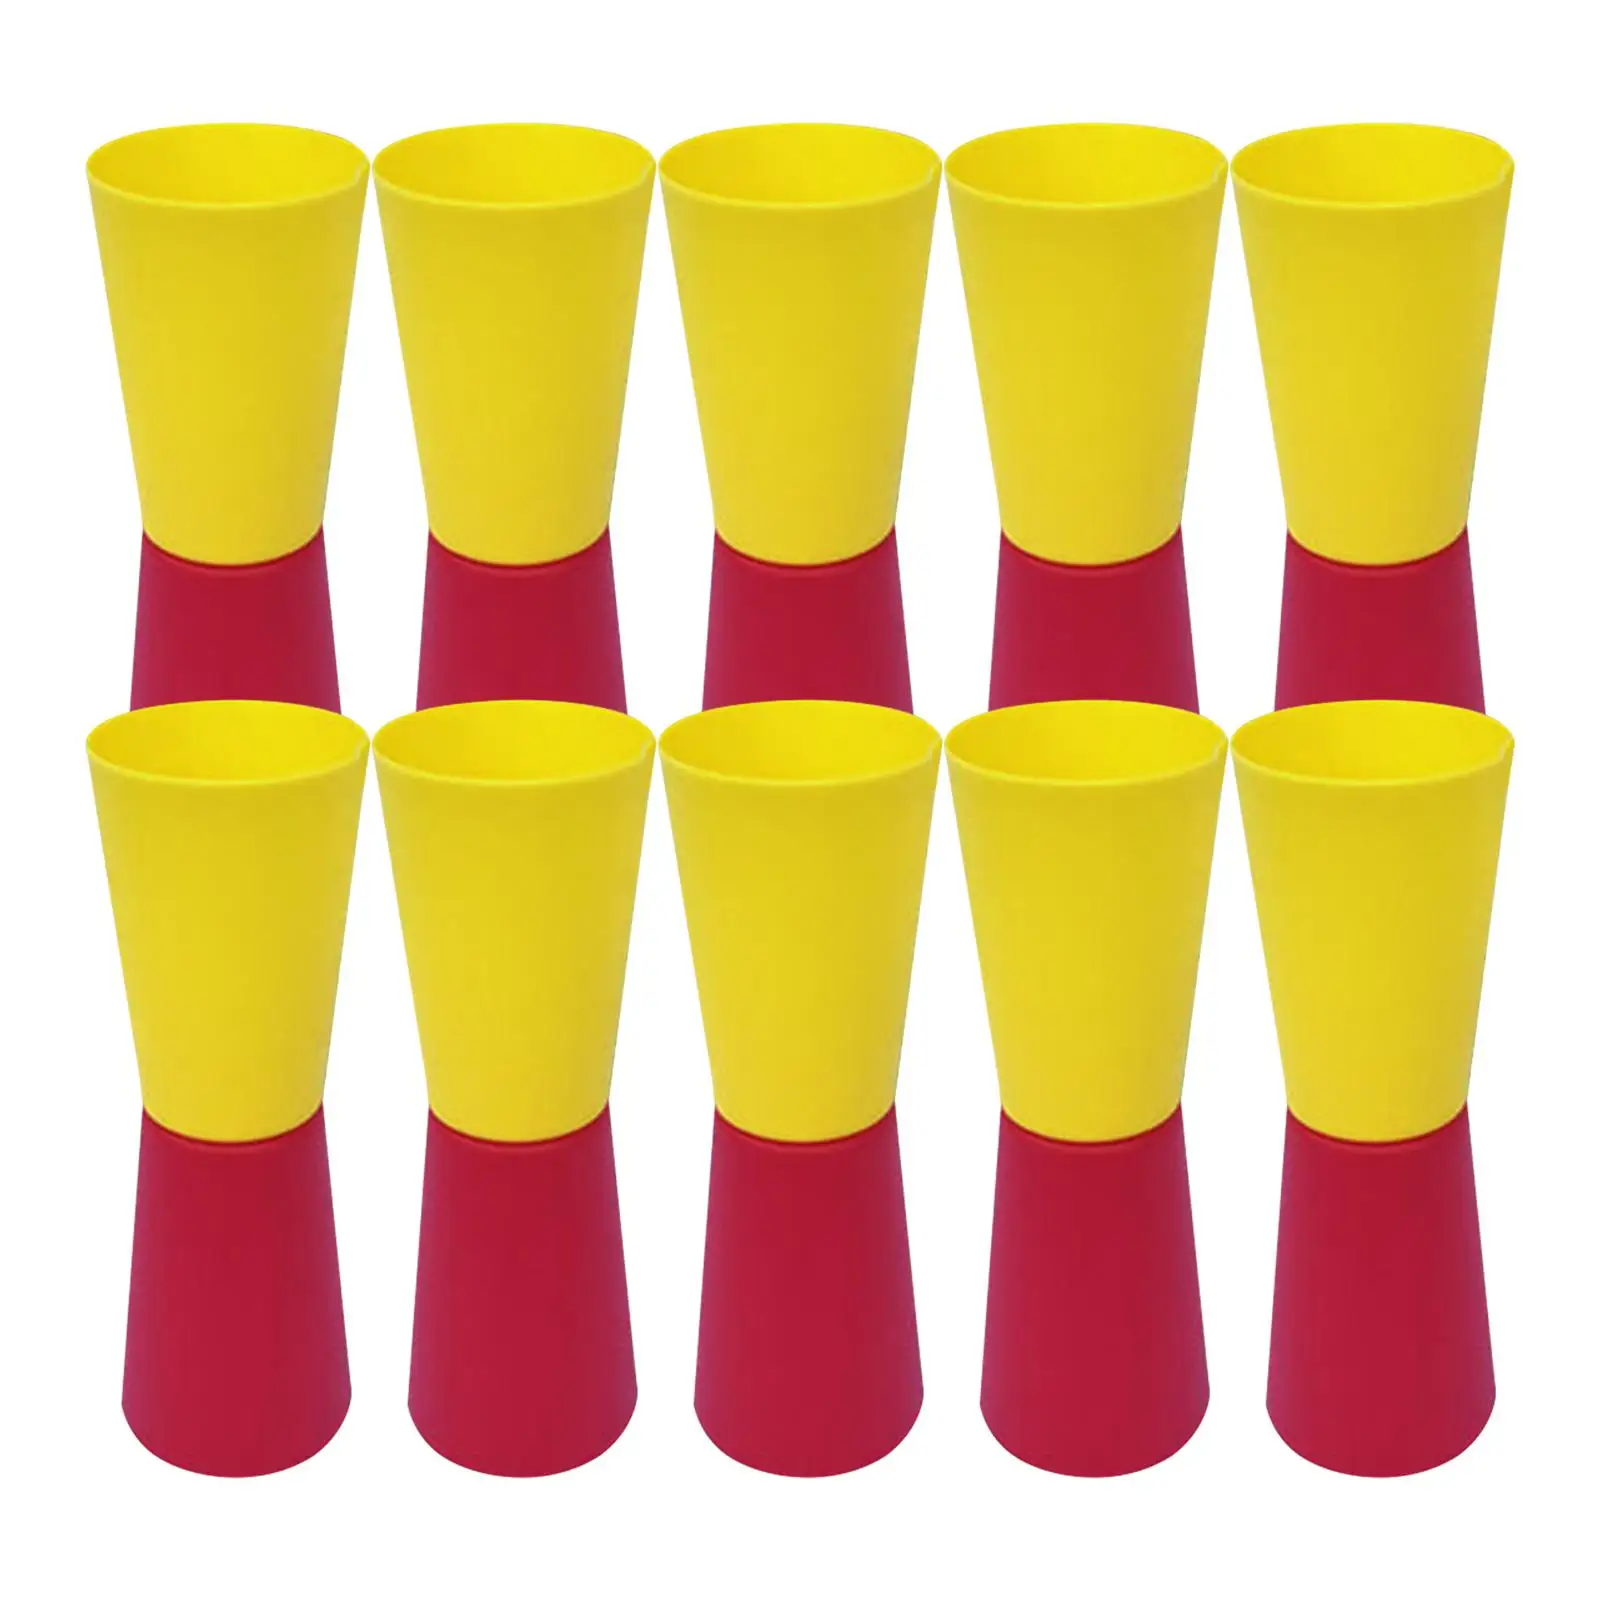 10 Pieces Flip Cups Speed Agility Training for Activity Festive Gym with Net